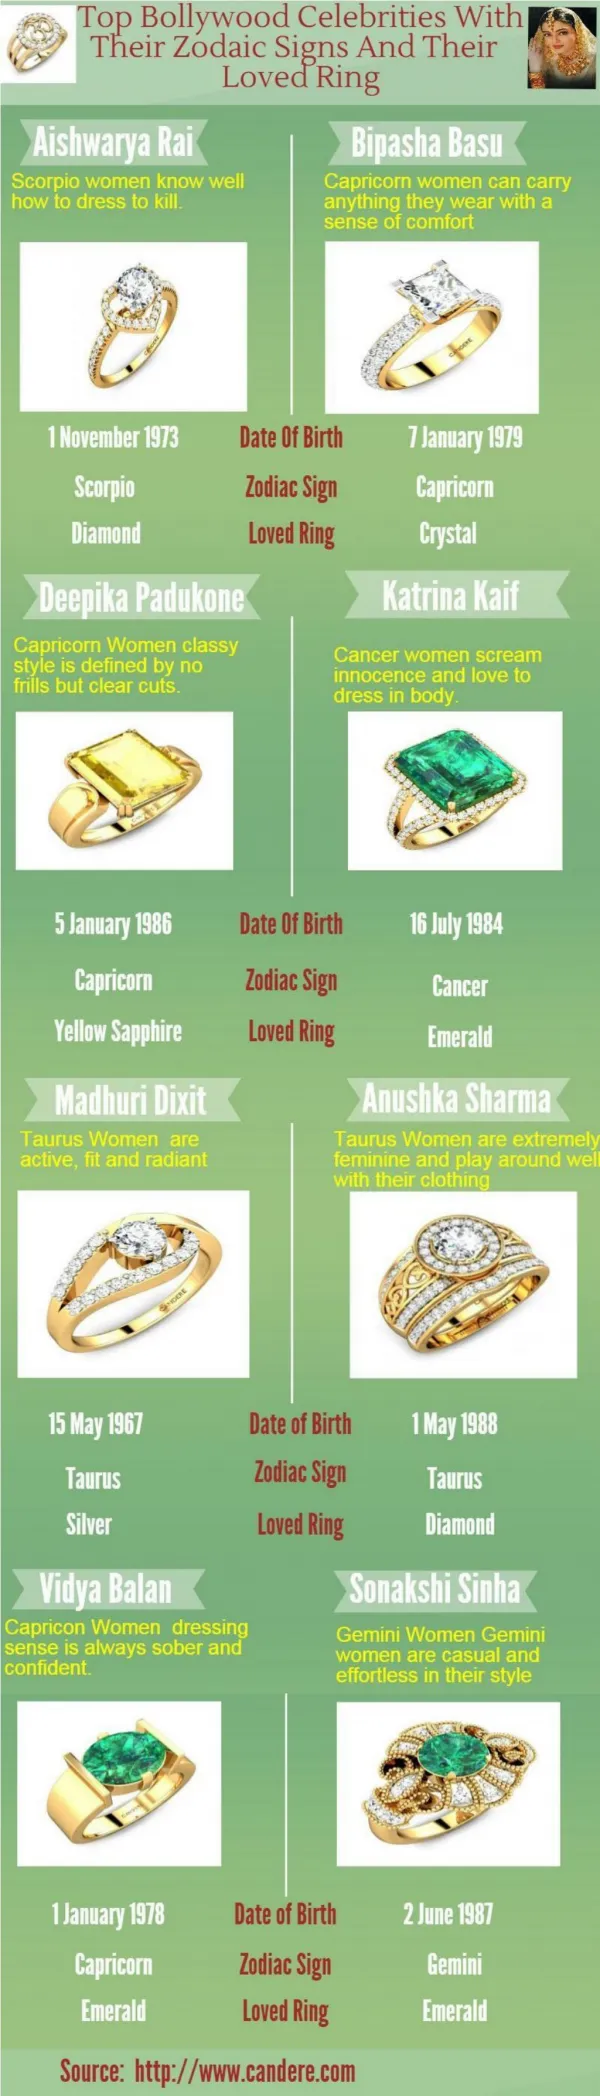 Top Bollywood celebrities with their Zodaic signs and their loved ring